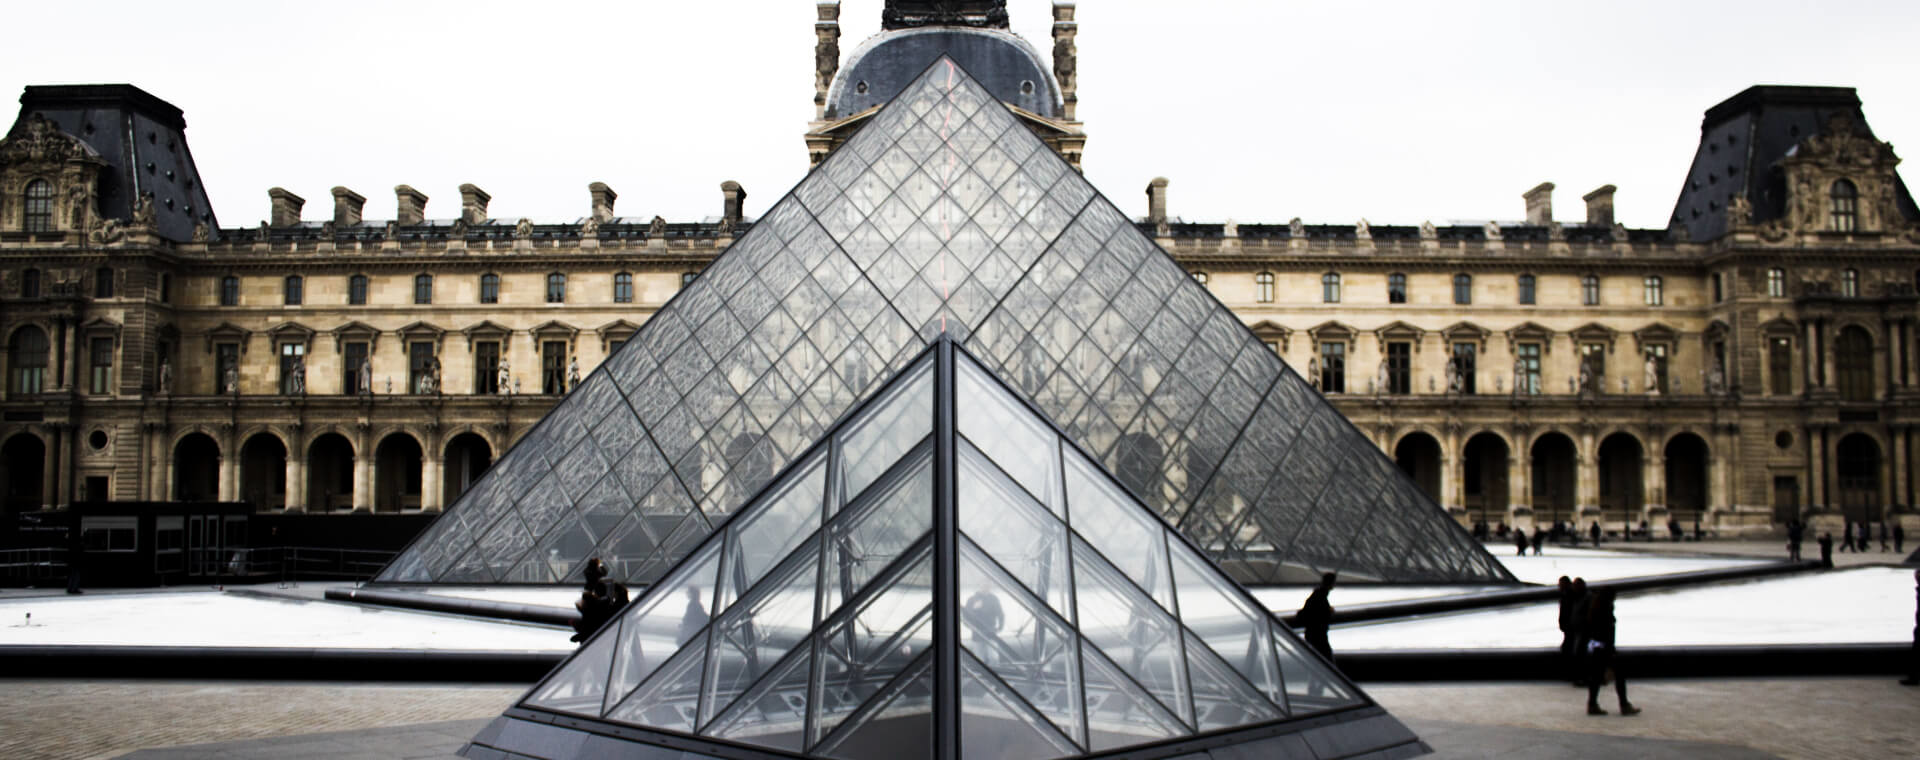 A large glass pyramid in front of a building.